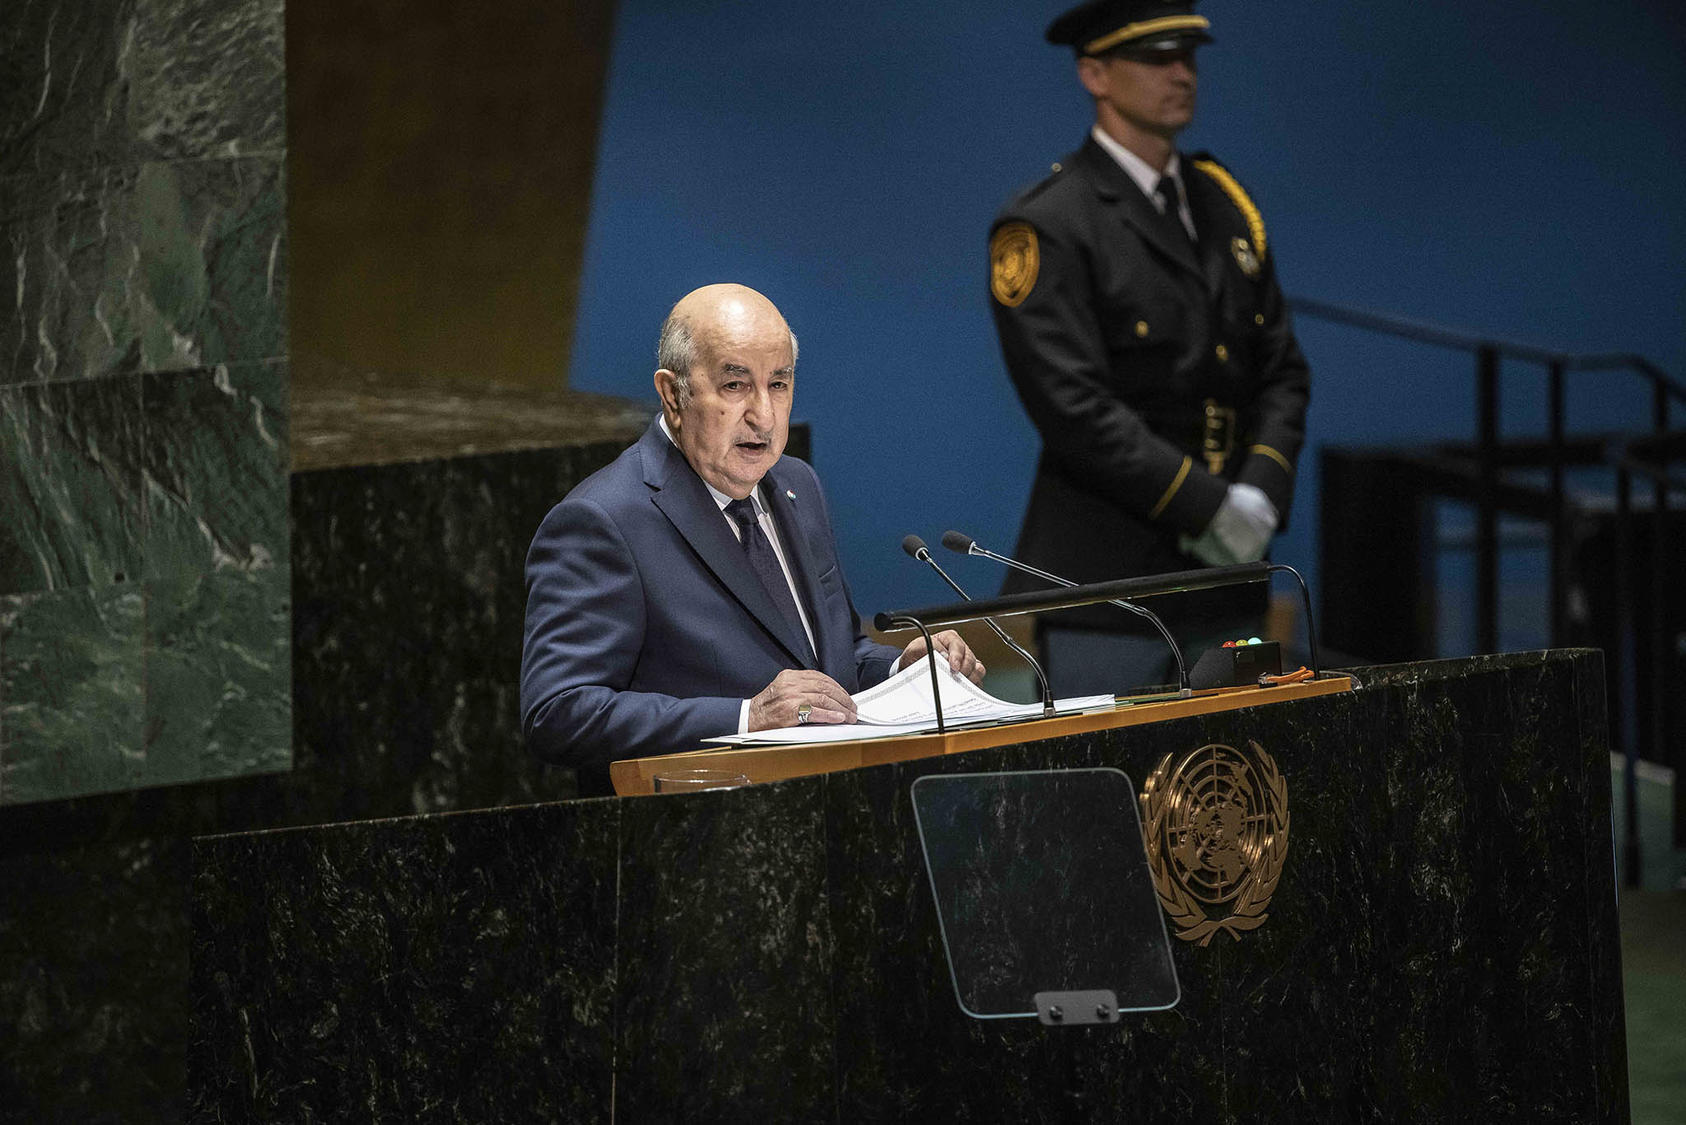 President Abdelmadjid Tebboune speaks at the United Nations last month. He announced this week that Algeria is ready to mediate in a return of Algeria’s neighbor, Niger, to constitutional rule following its July coup. (Dave Sanders/The New York Times)